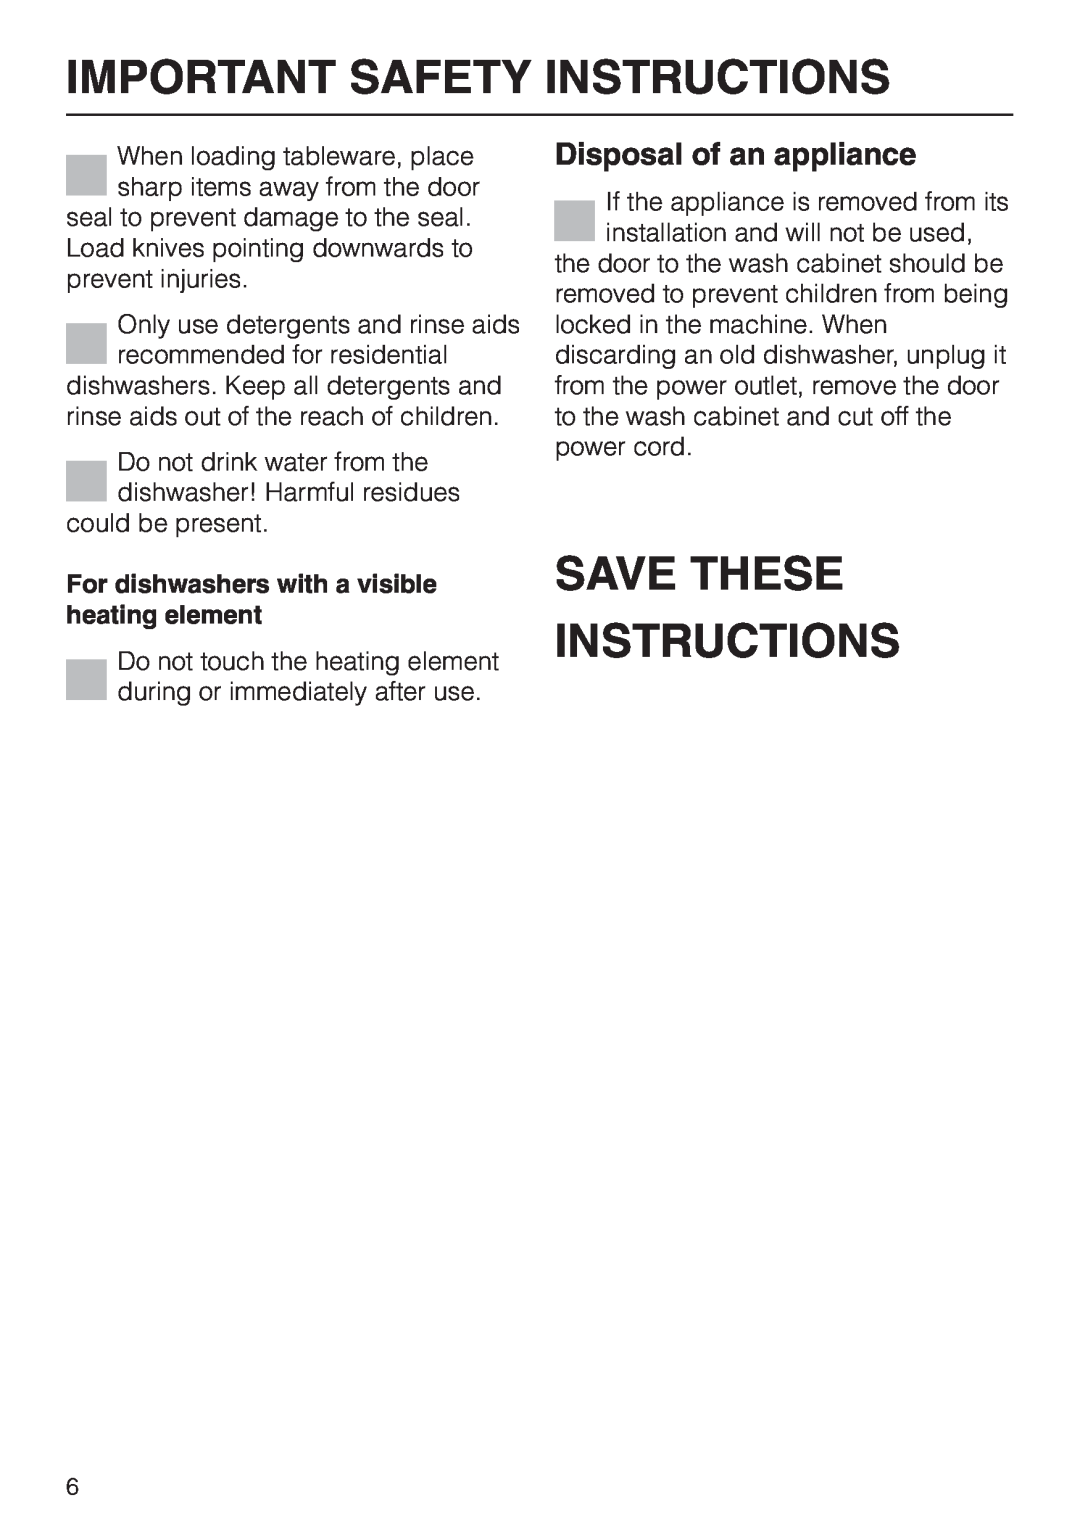 Miele Incognito manual Save These Instructions, Disposal of an appliance, Important Safety Instructions 